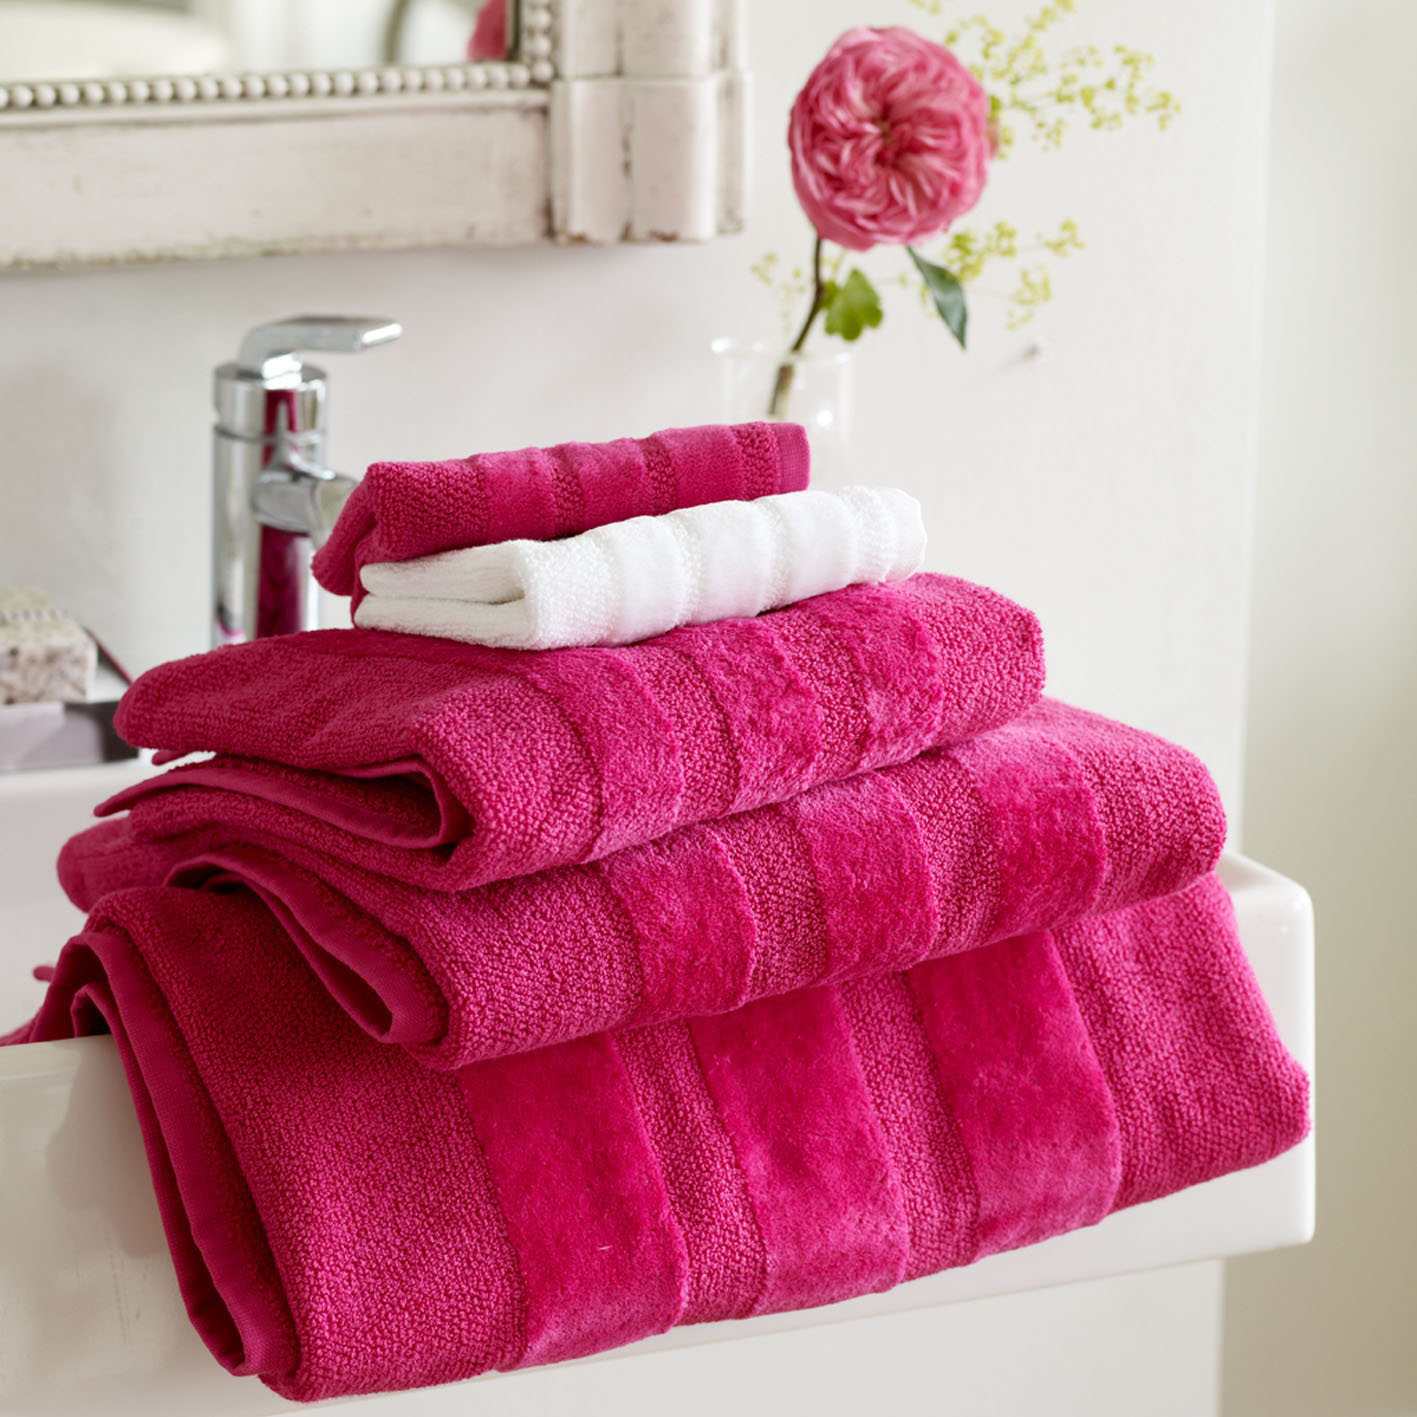 Hard Goods Towels and Robes Buying Agency in Delhi